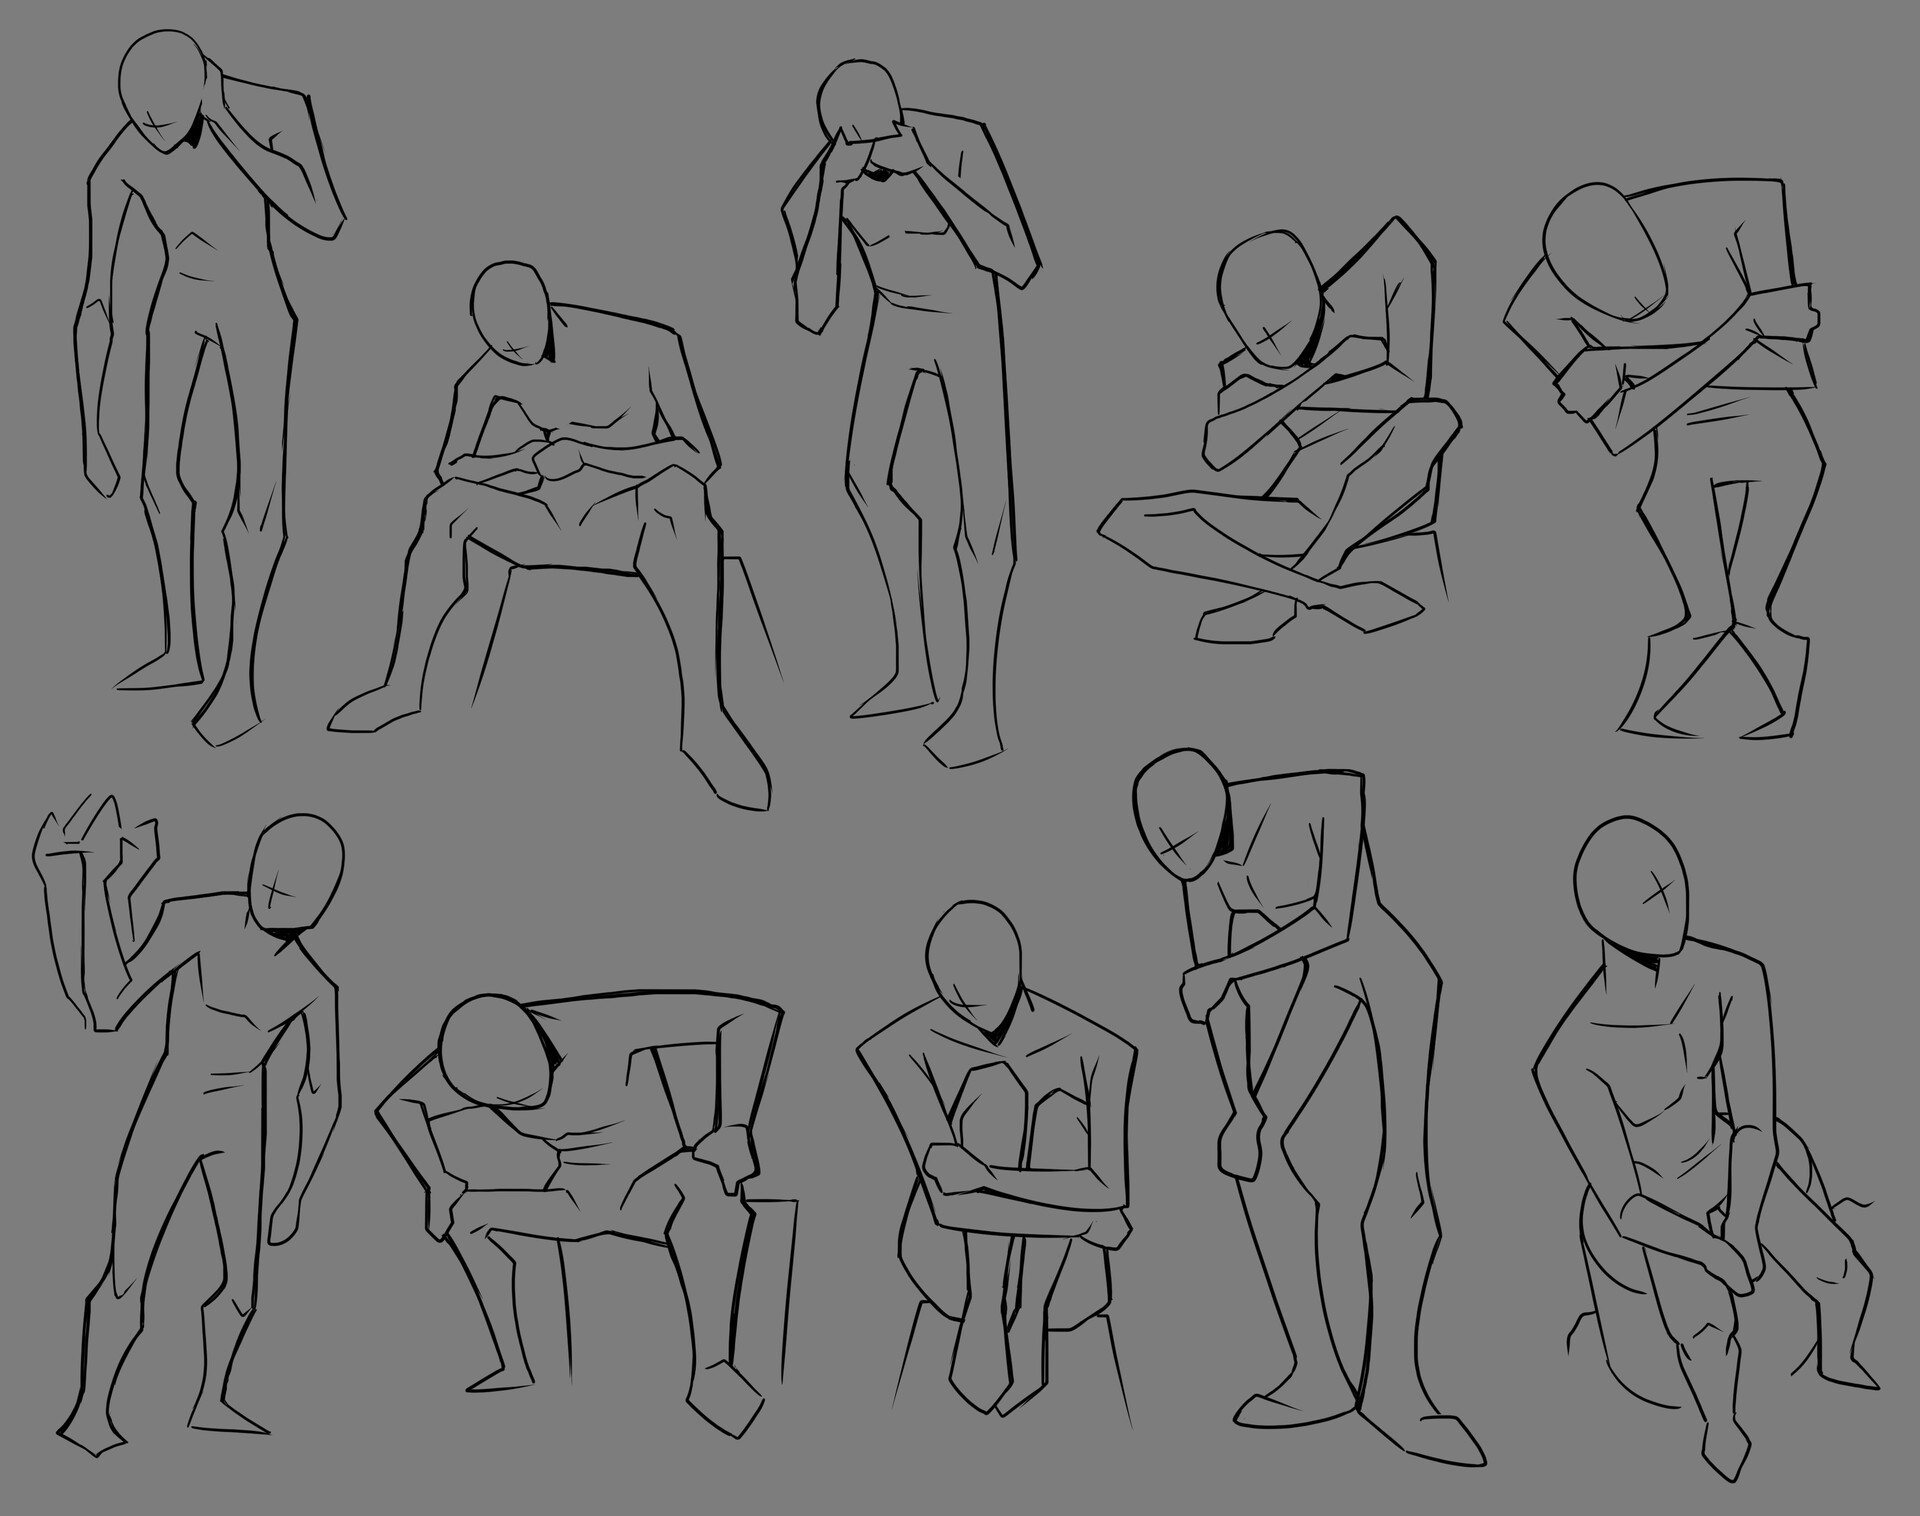 Quick pose drawings - 30 second & 1 minute by Thomas Gamble